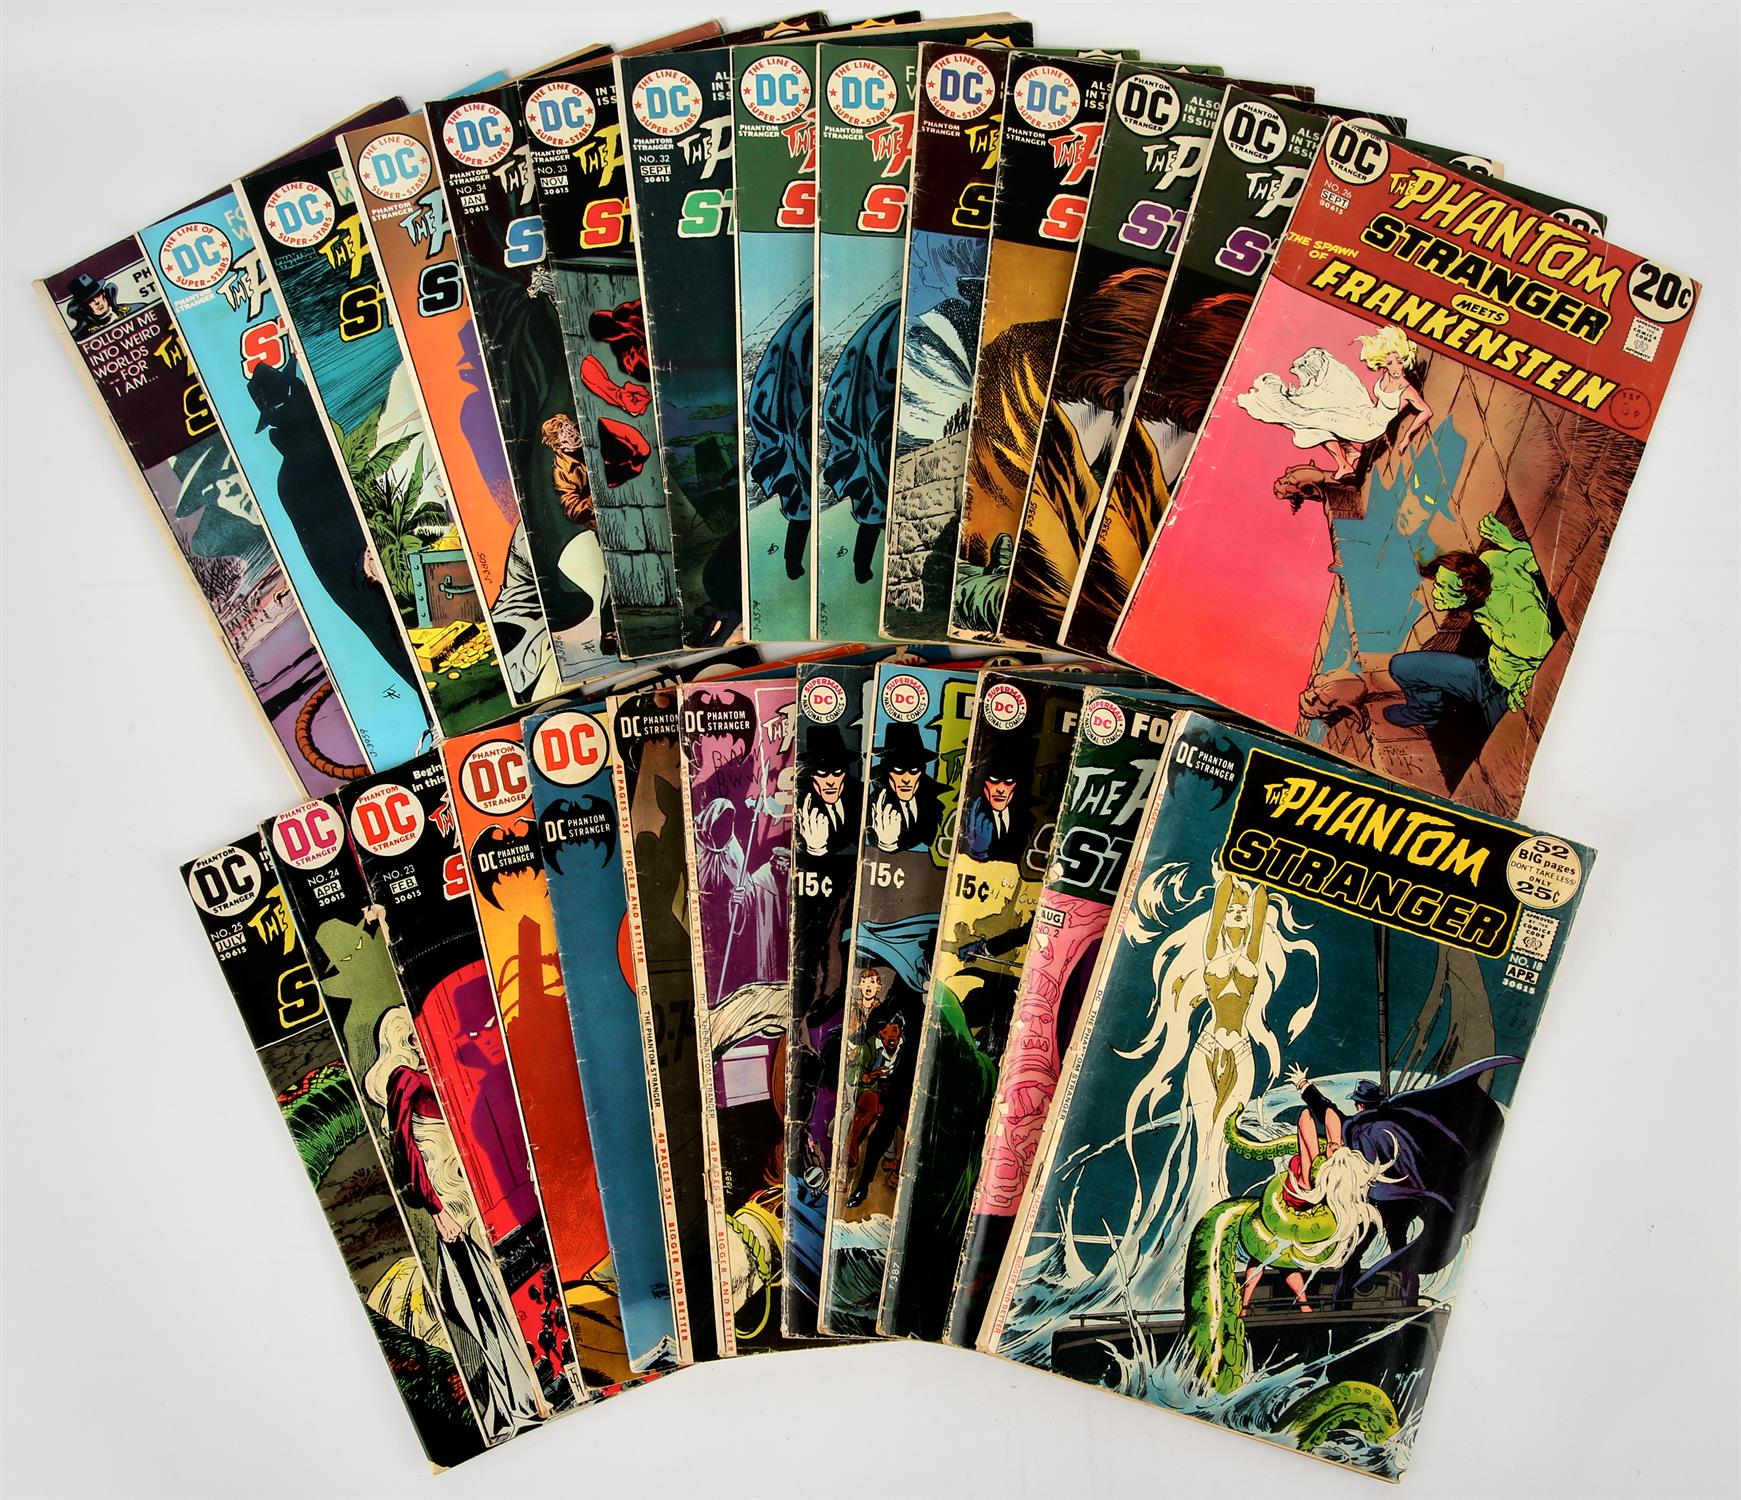 The Phantom Stranger: 26 issues including Neal Adams covers (DC, 1972 onwards). Key and highly